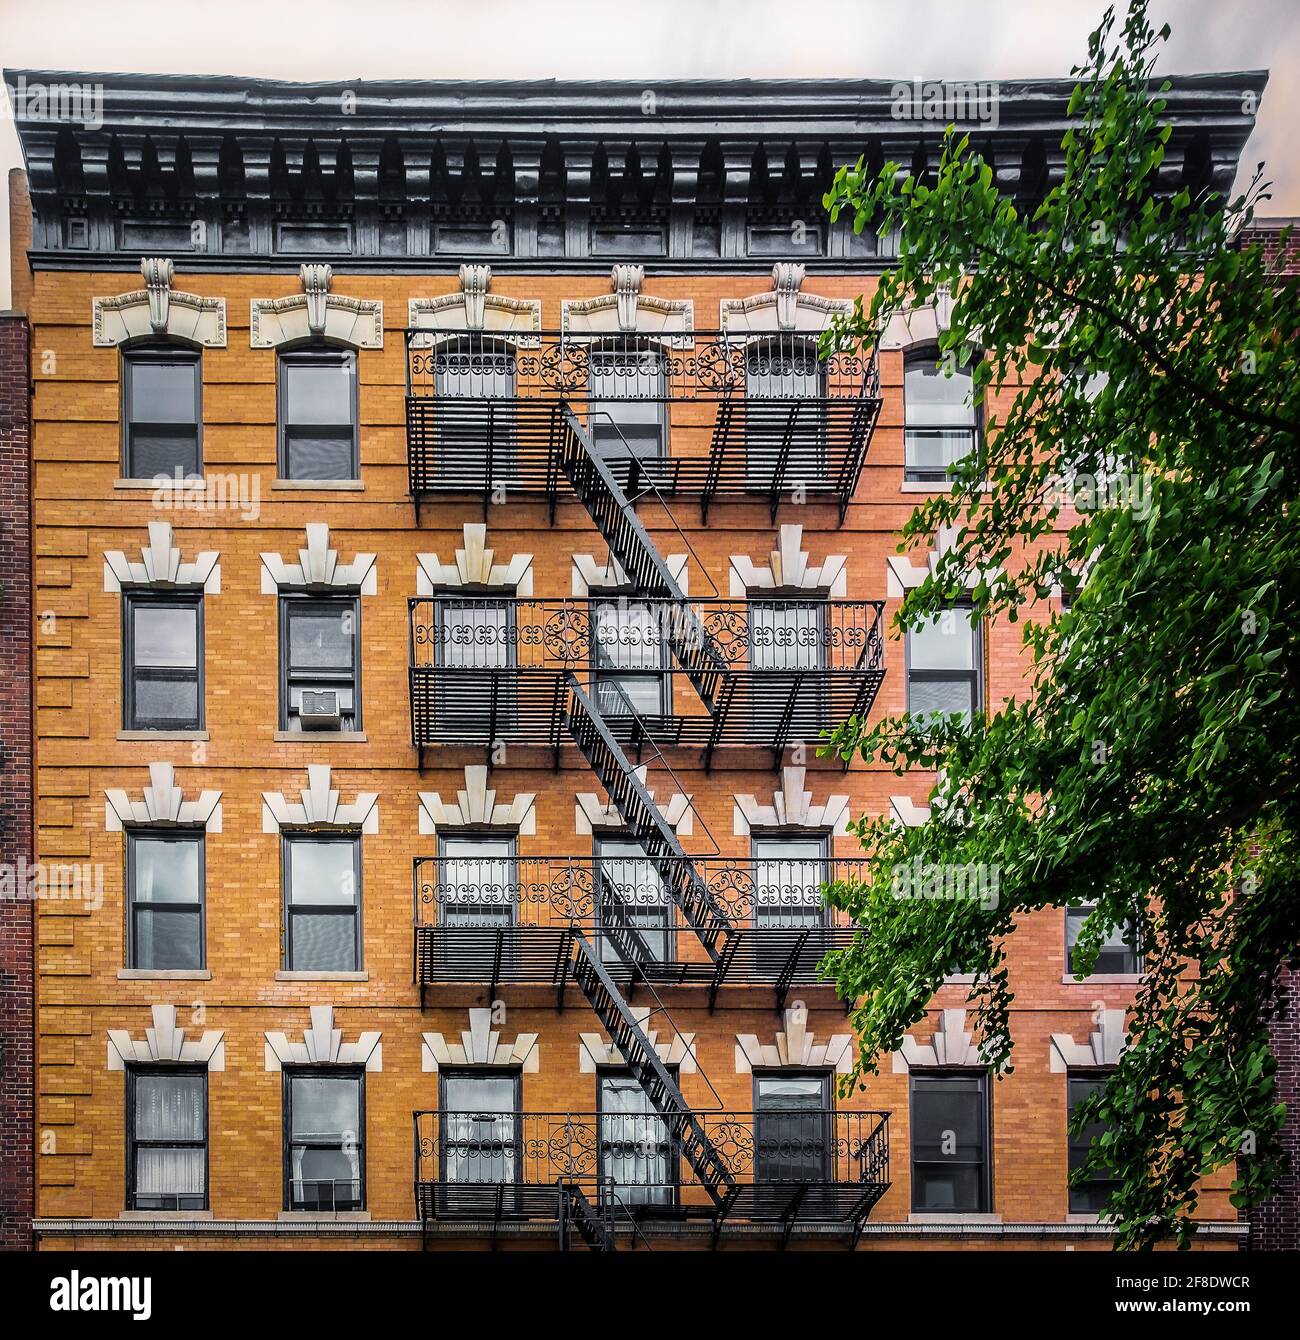 New York City, USA, May 2019, view of an orange brick building with ...